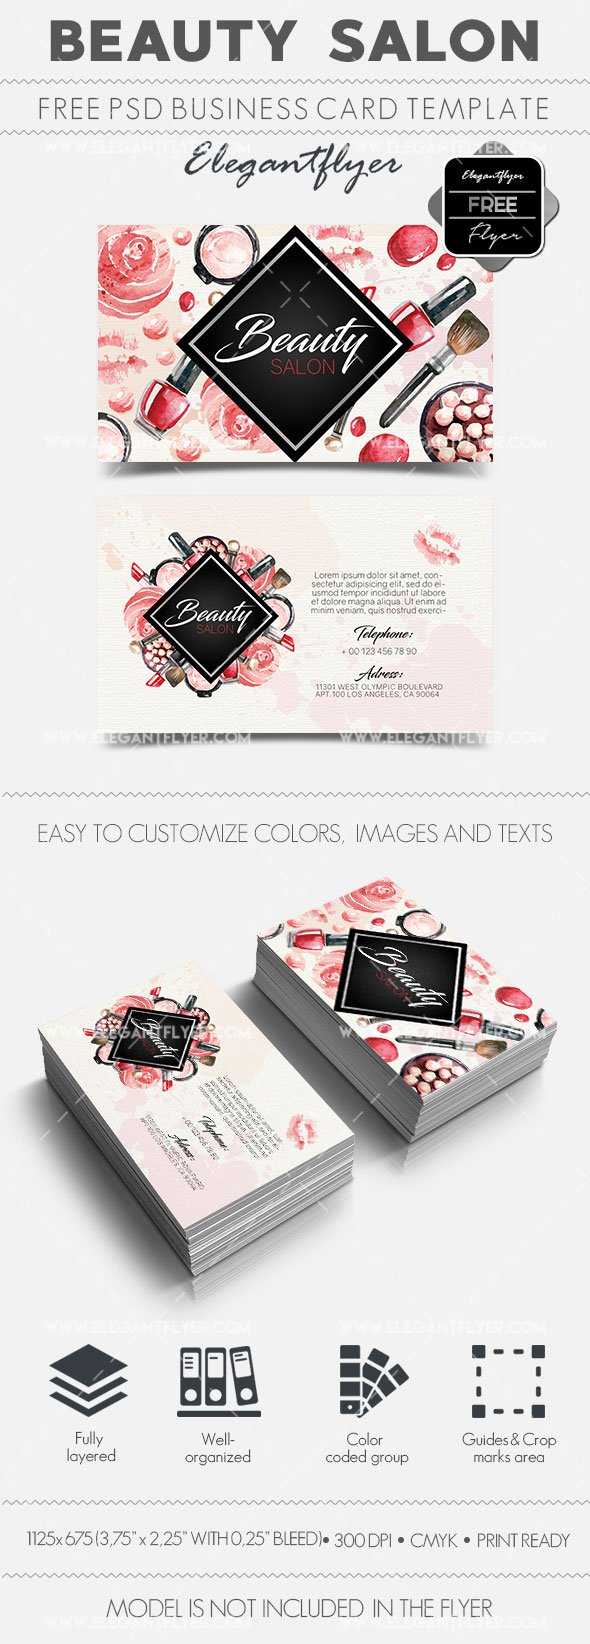 Free Business Card For Beauty Salon In Hair Salon Business Card Template